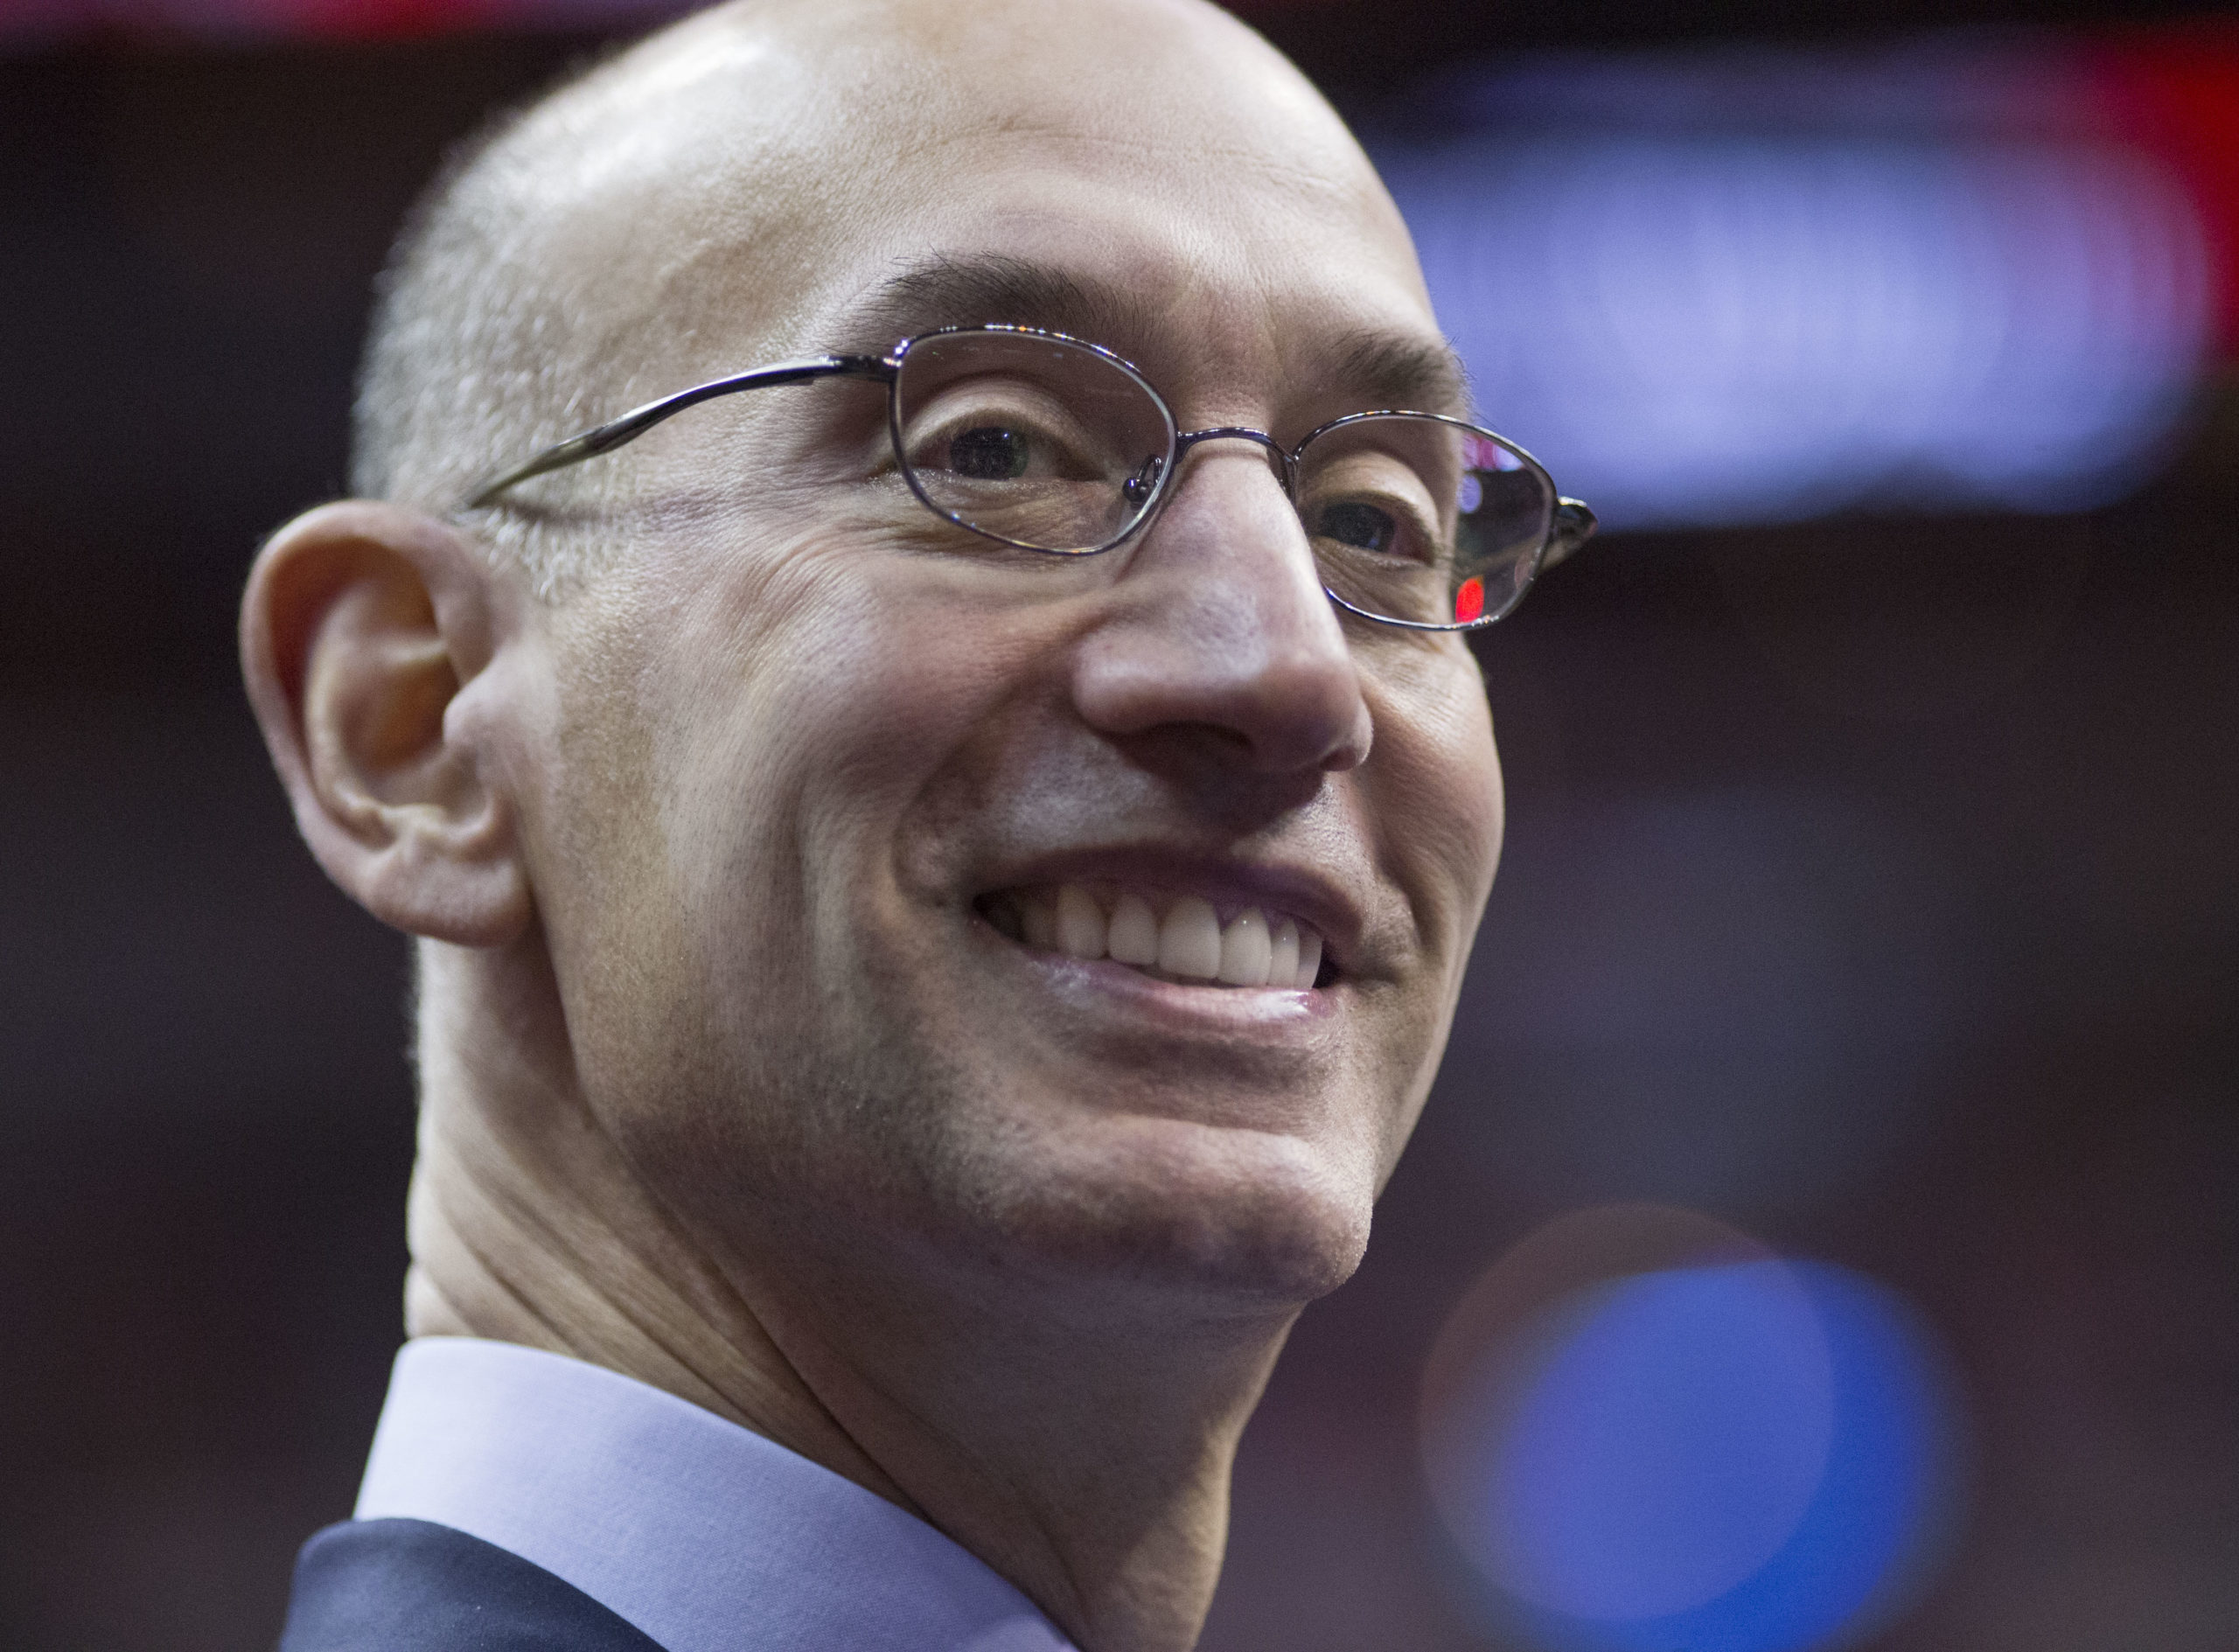 Editorial: NBA Draft should be postponed to allow for proper evaluations